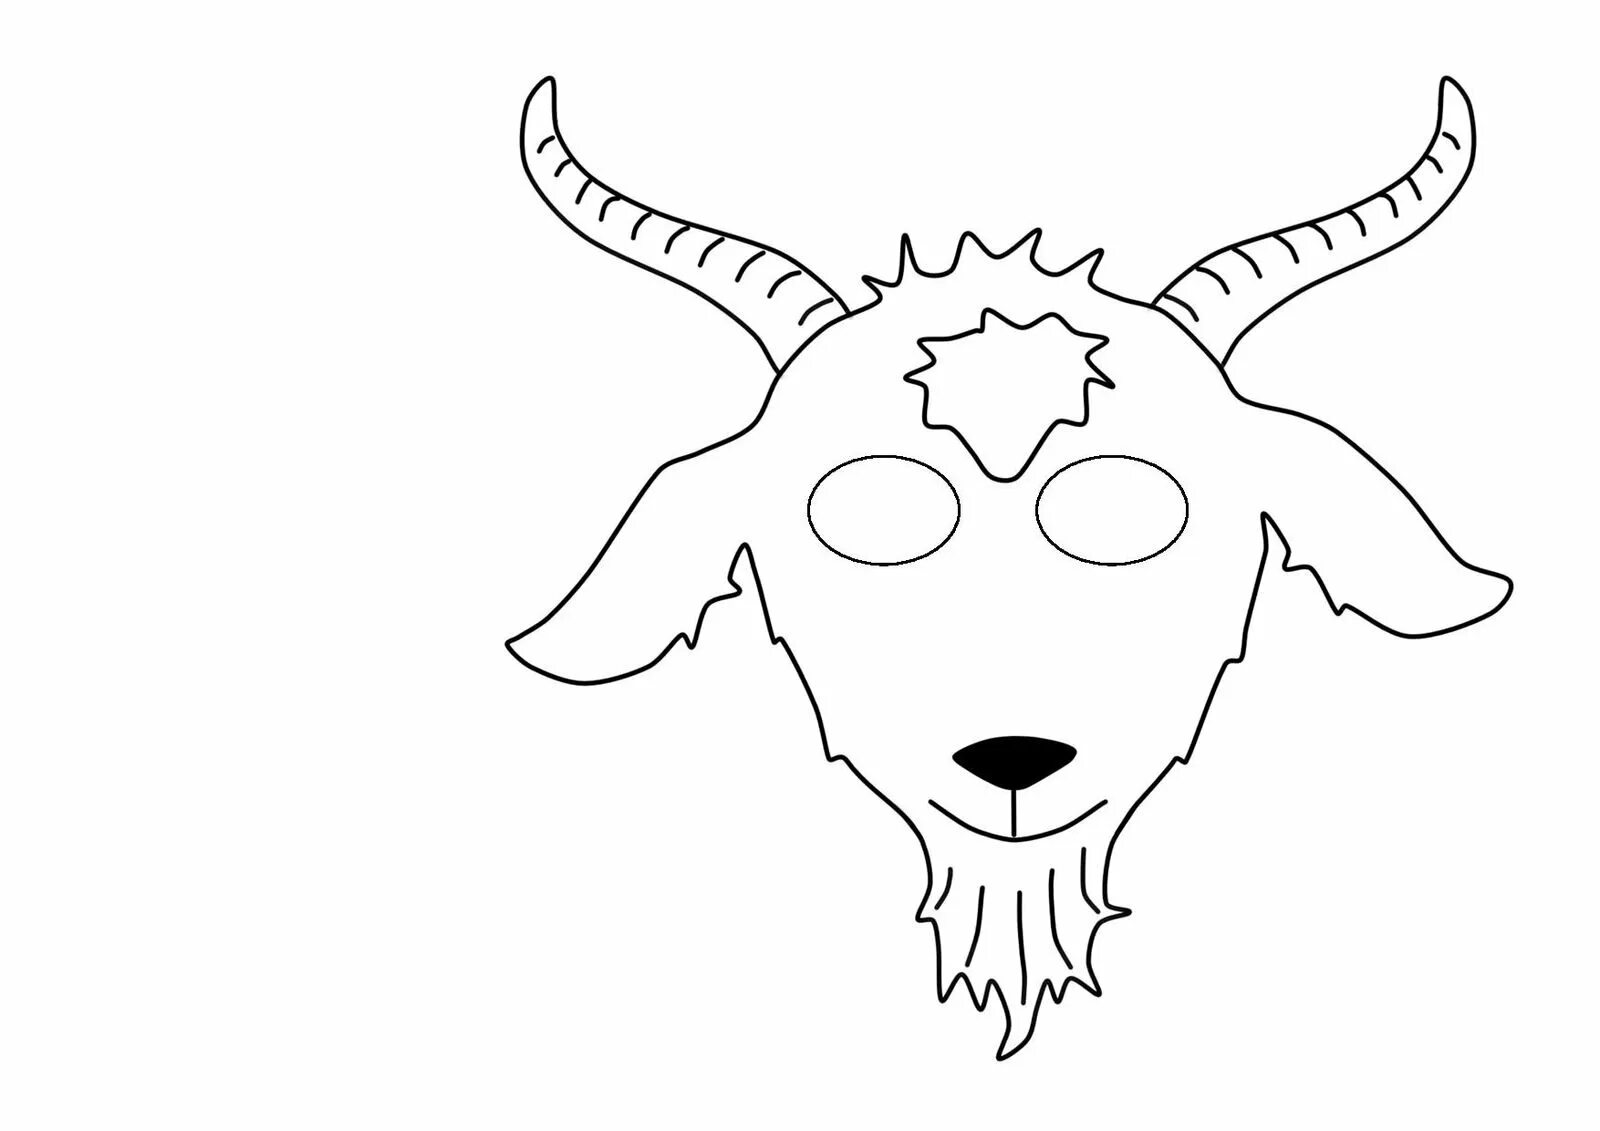 Color-frenzy goat mask coloring page